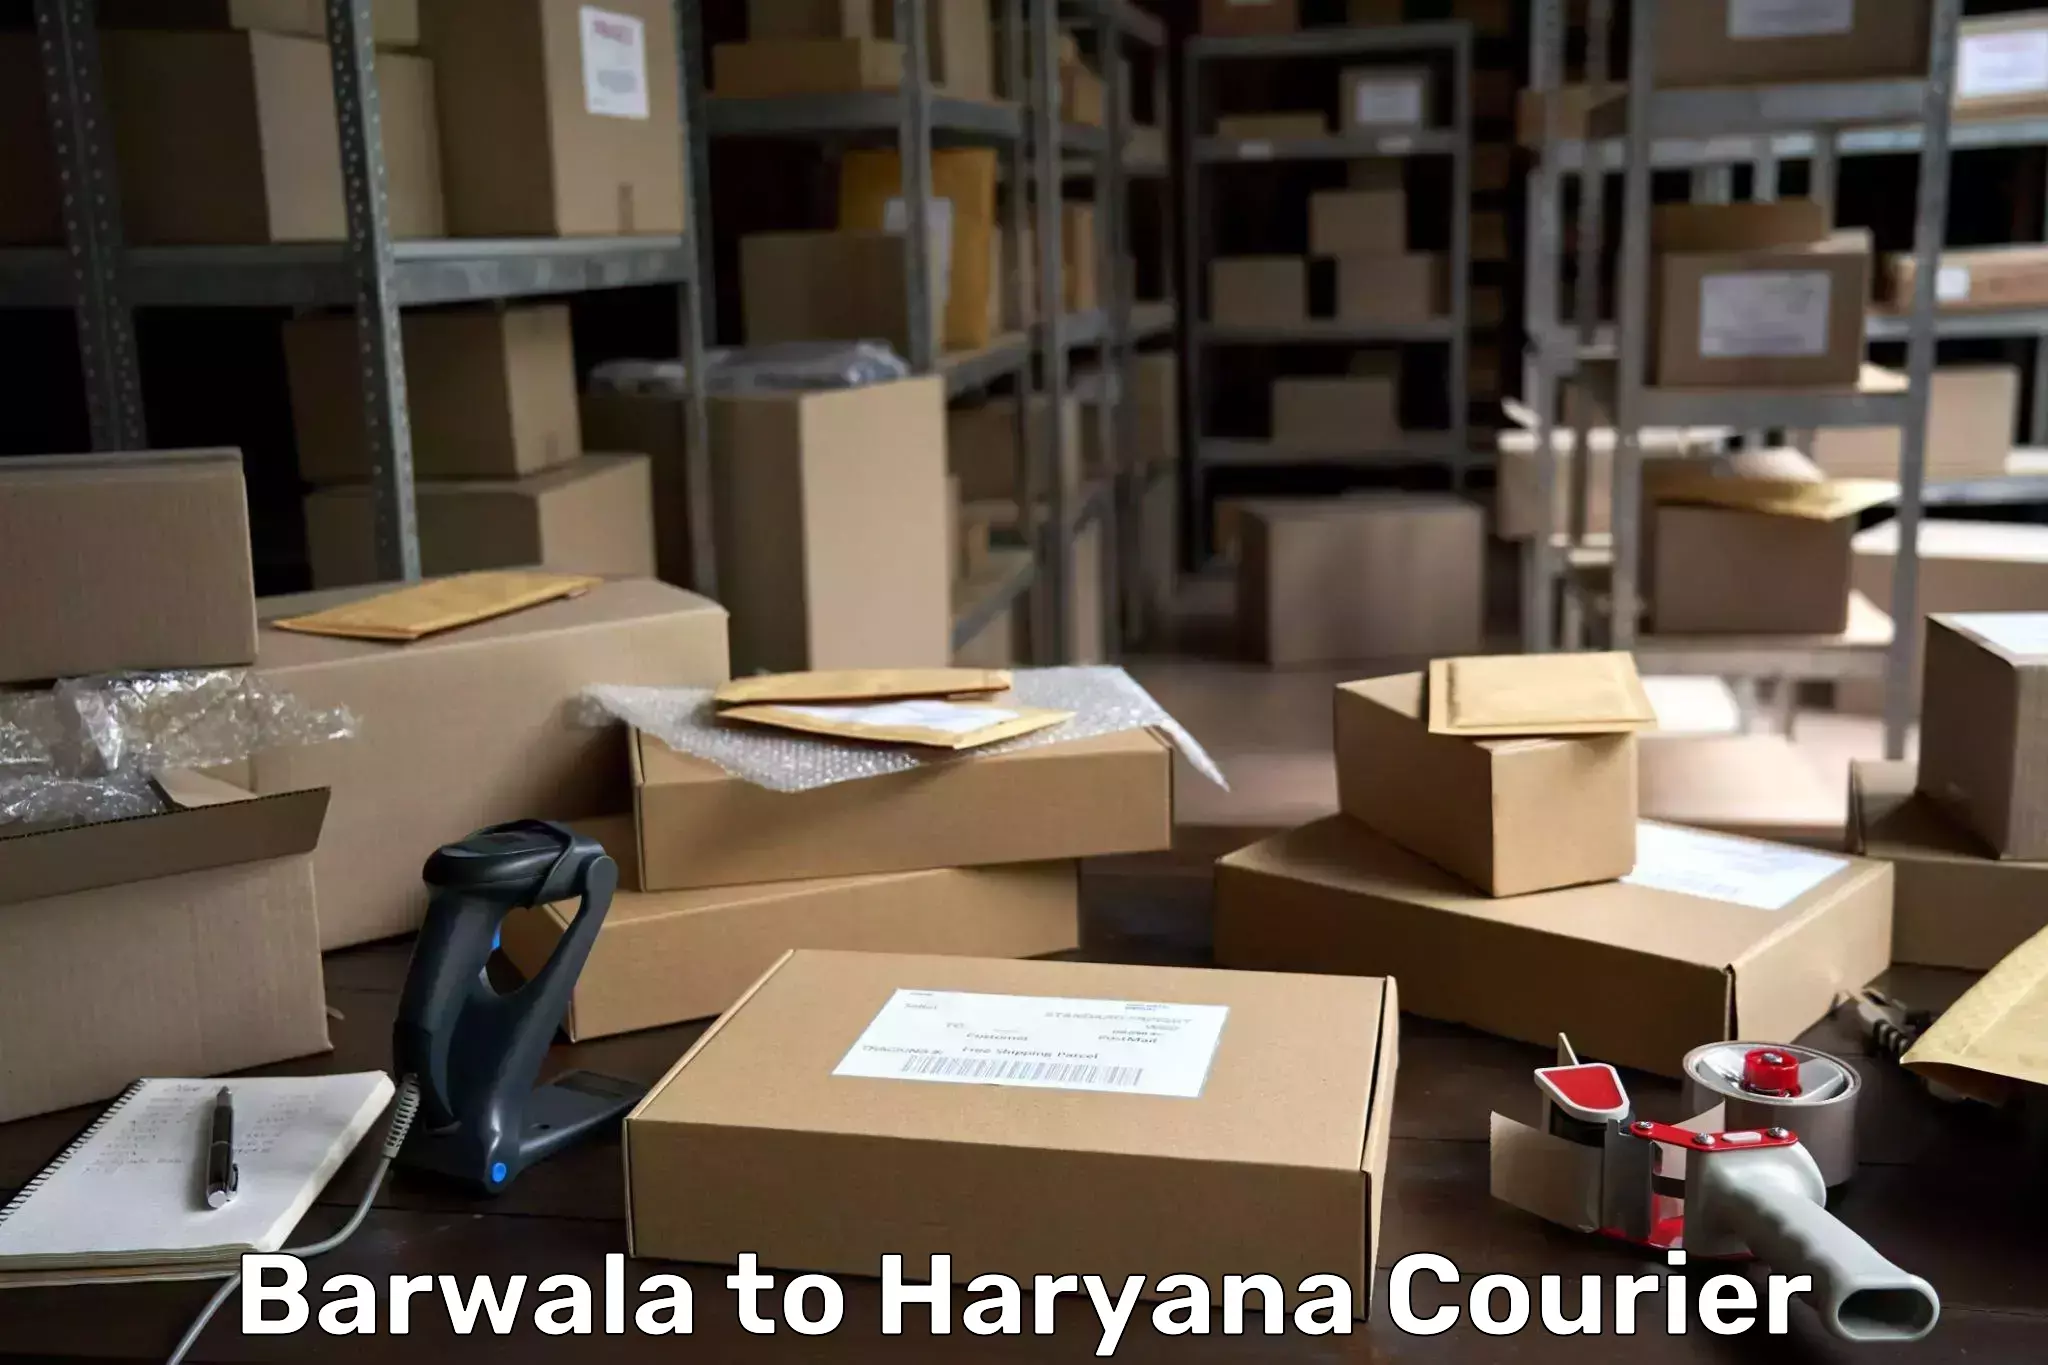 Courier service efficiency in Barwala to Ambala